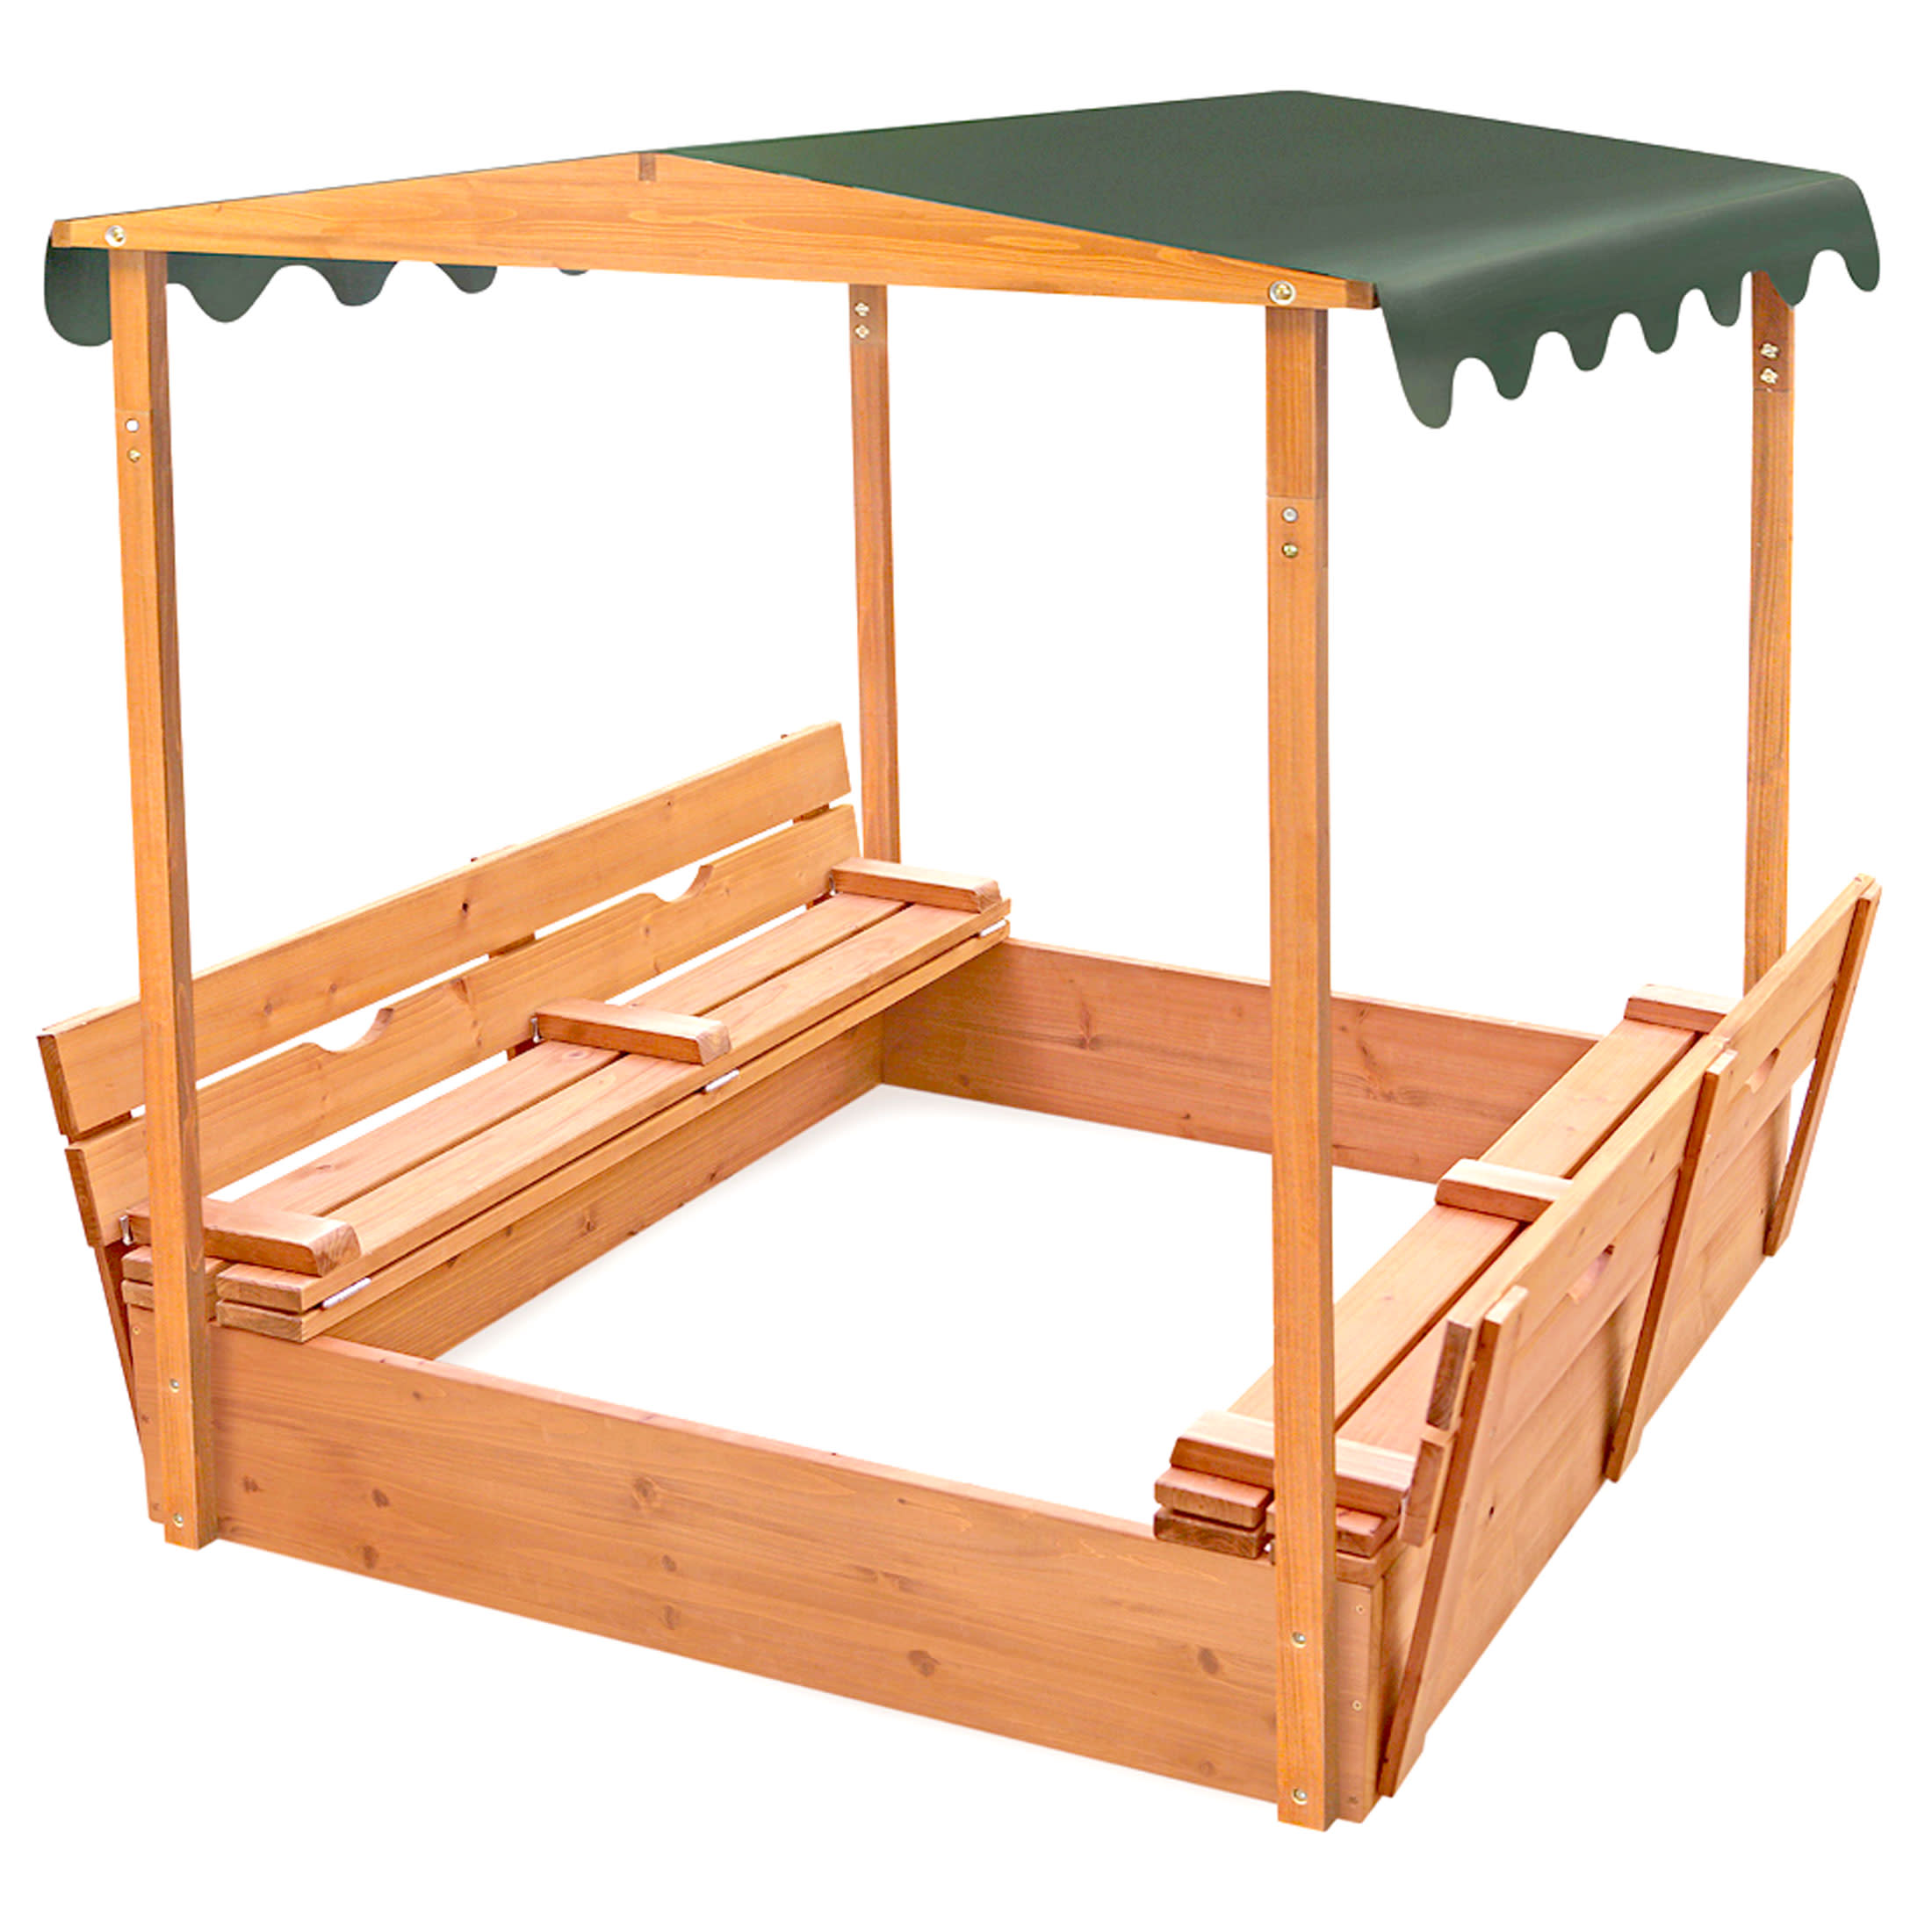 Badger Basket Covered Convertible Cedar Sandbox with Canopy and Two Bench Seats - image 1 of 9